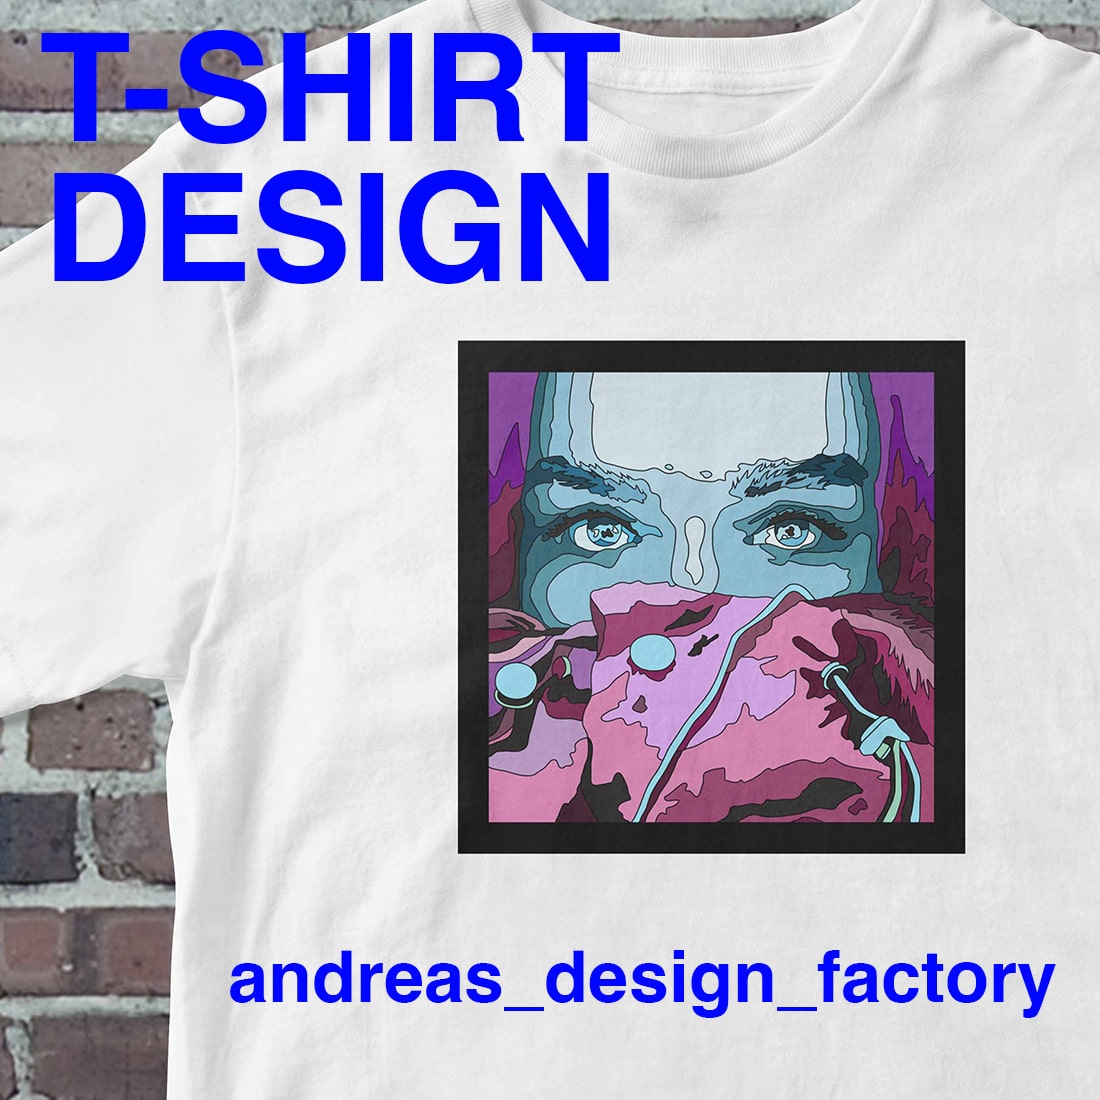 56 T-Shirt Design Ideas That Are Seriously Next-Level | Printful